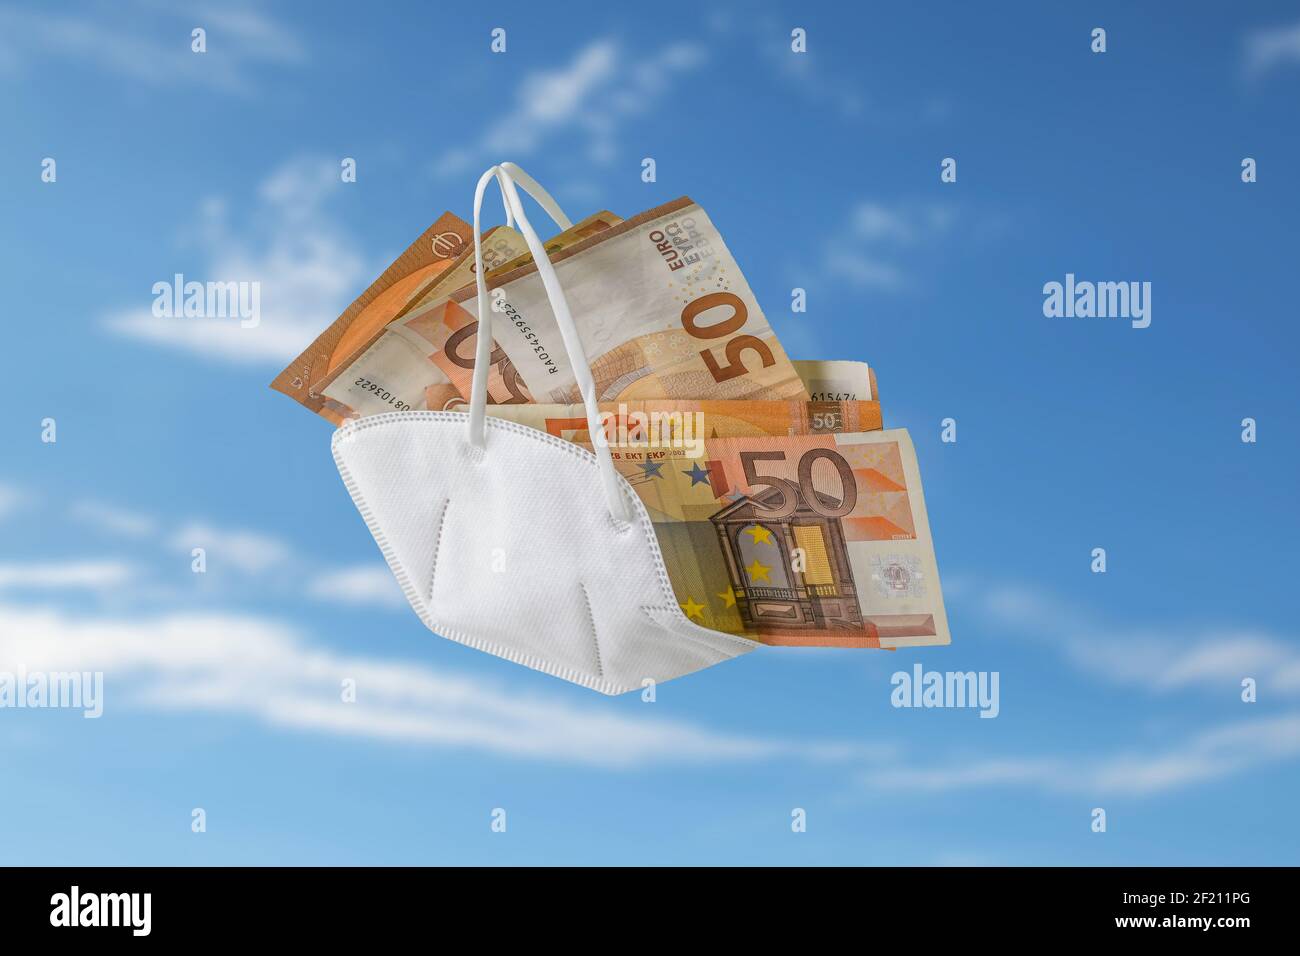 medical ffp2 face mask against covid-19 filled like a bag with euro banknotes, concept for enrichment by corruption or rising costs in health care, bl Stock Photo